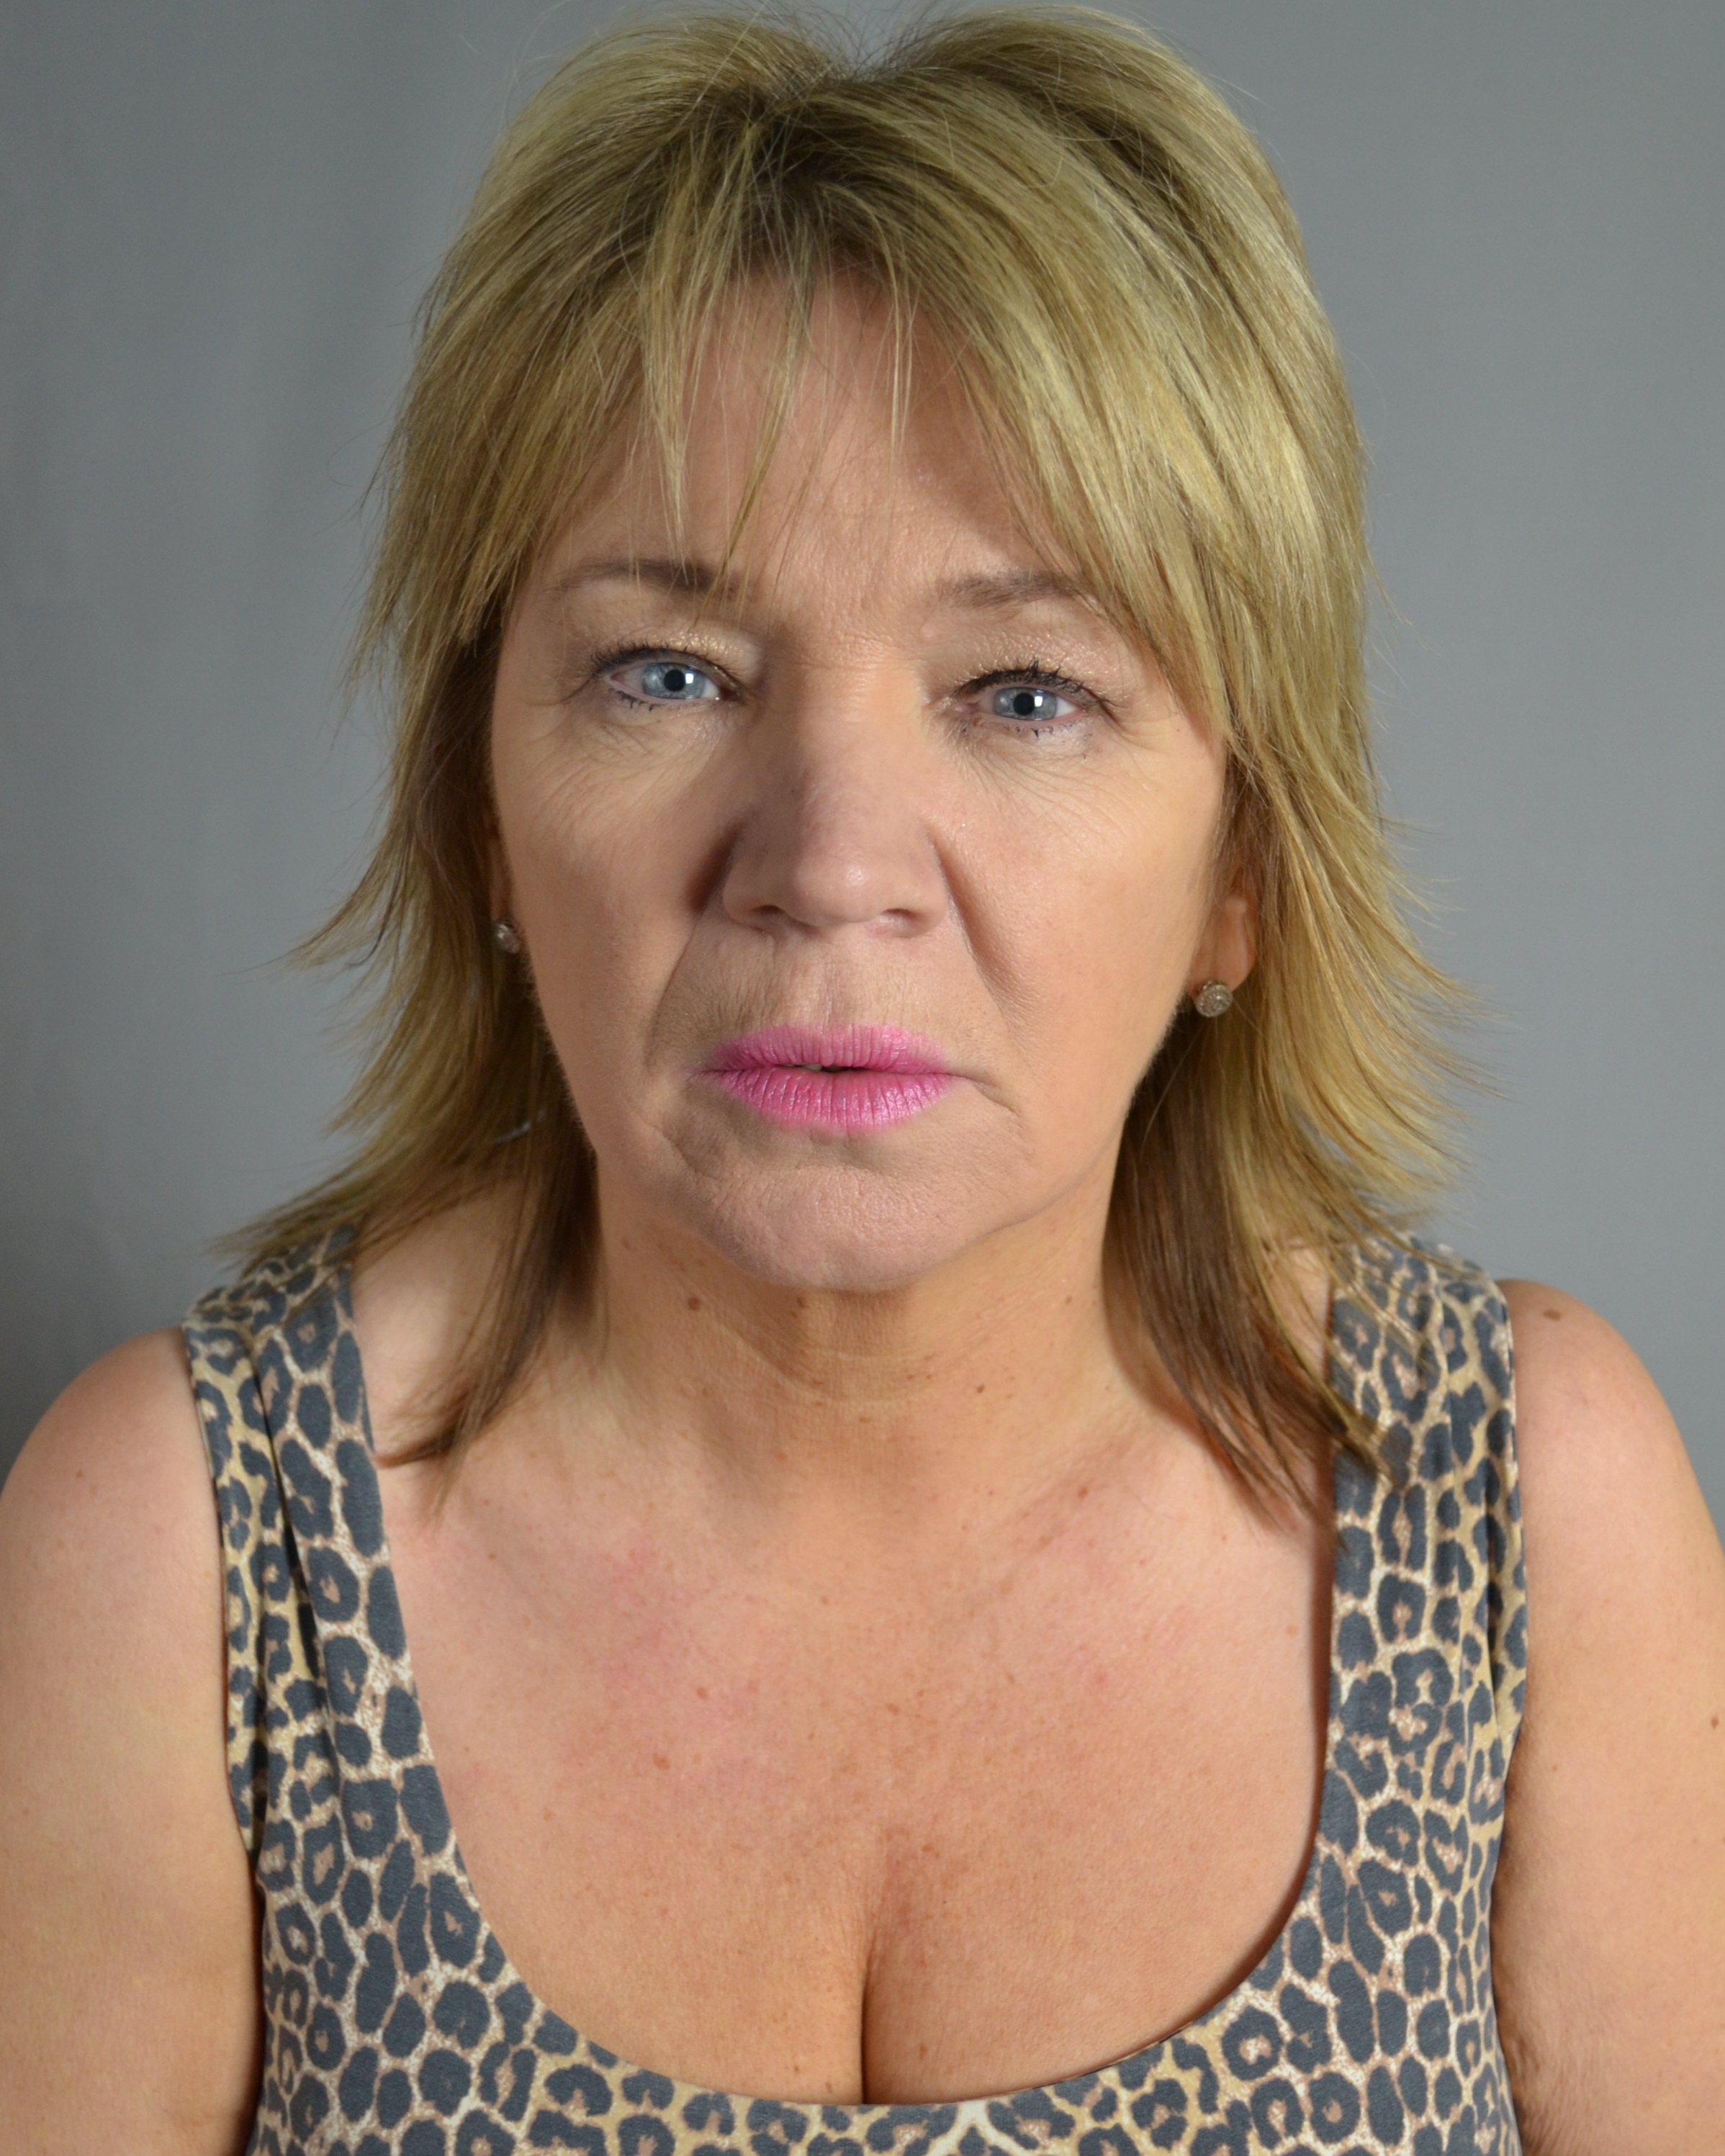 Cathy Coxon - Stark Talent - Manchester Casting Agency - Extras